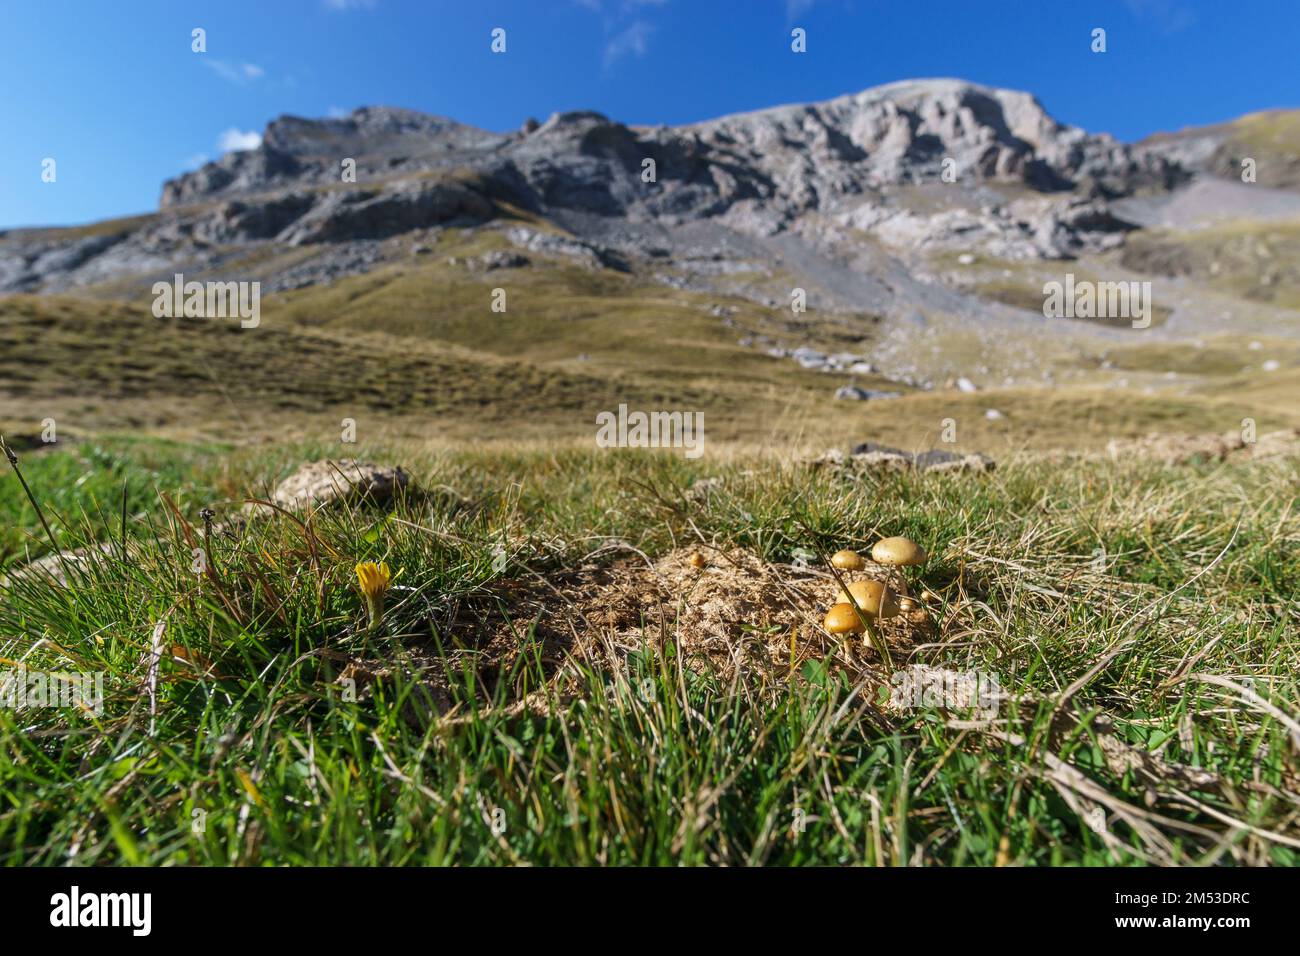 Yellow mushrooms growing out of a cow dung on a meadow in the pyrenees mountains Stock Photo